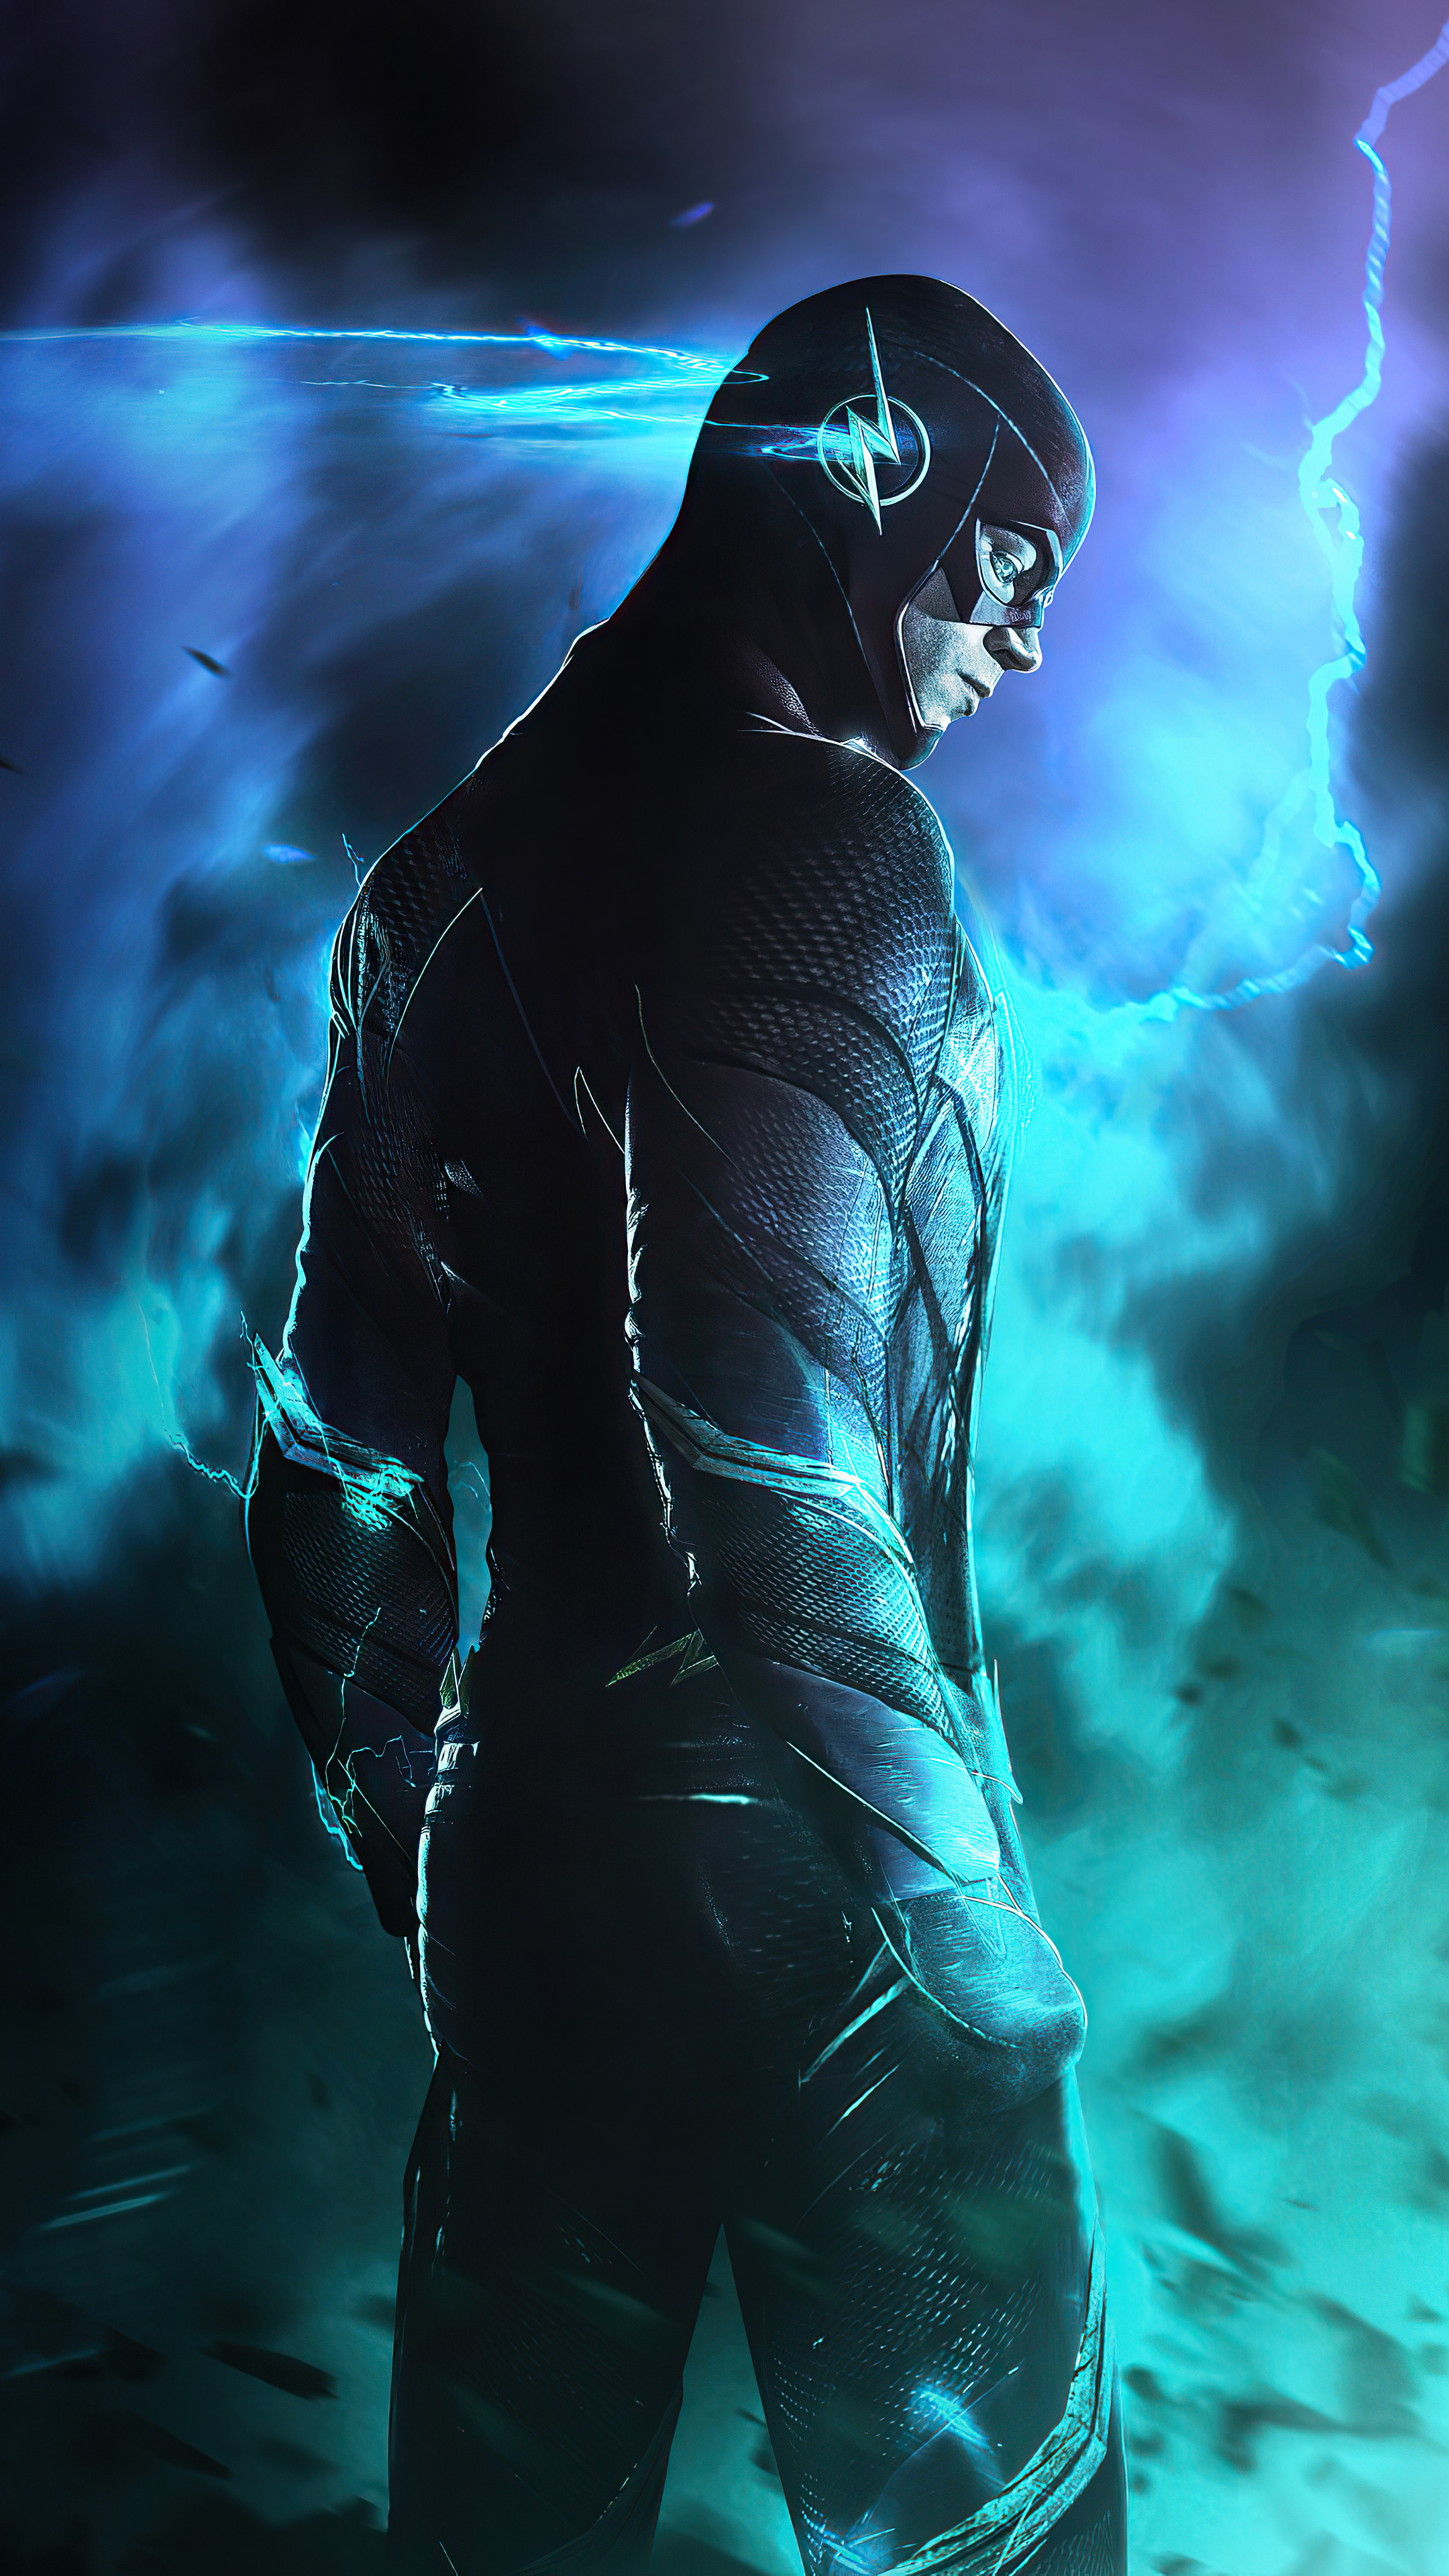 Grant Gustin: Flash, A costumed superhero crime-fighter with the power to move at superhuman speeds. 2160x3840 4K Wallpaper.